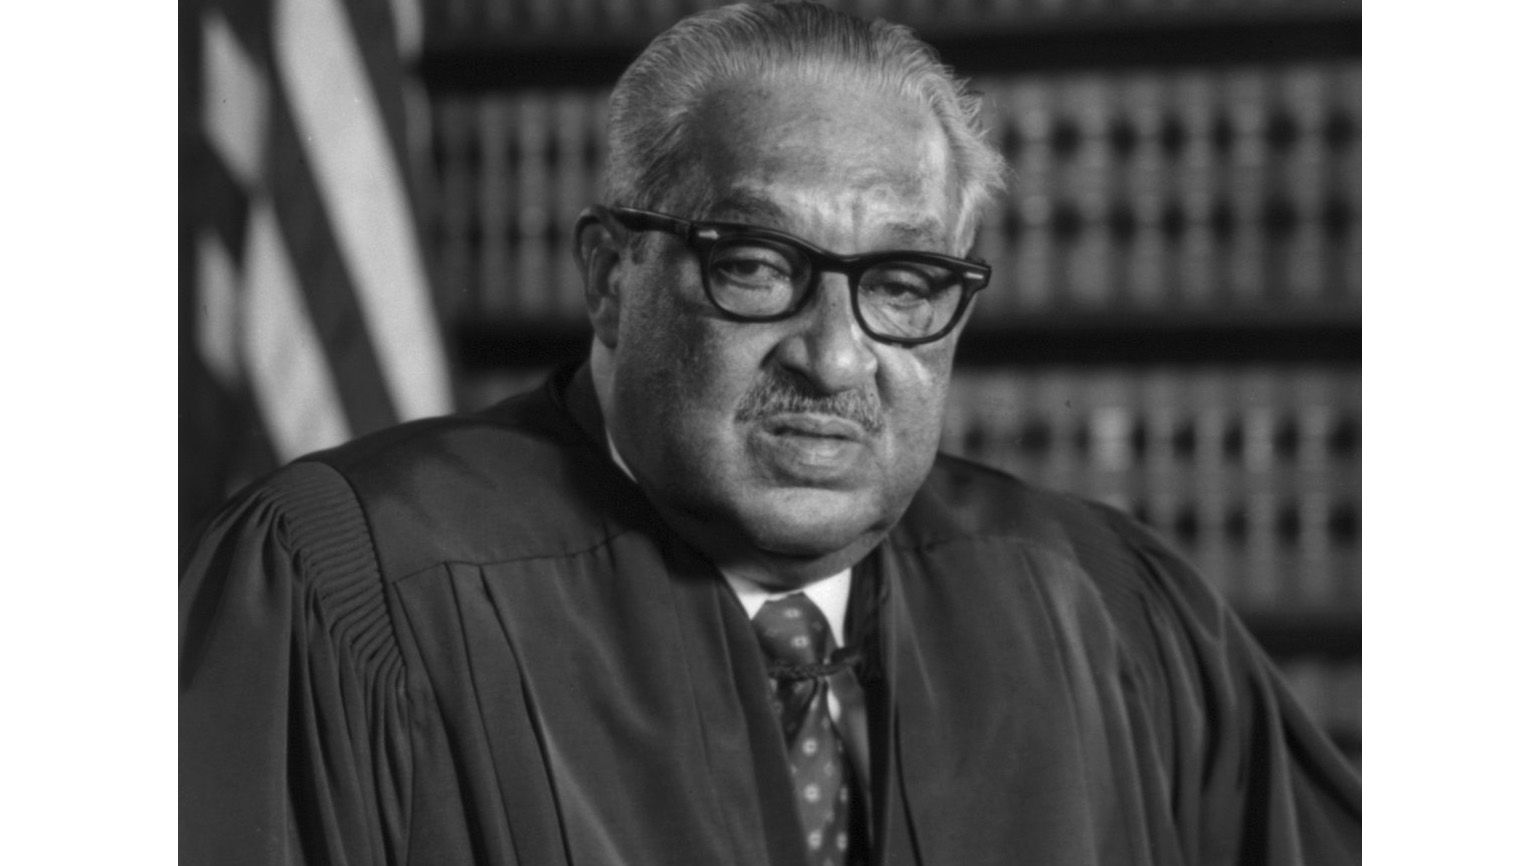 Thurgood Marshall as an inspirational Black History Month person